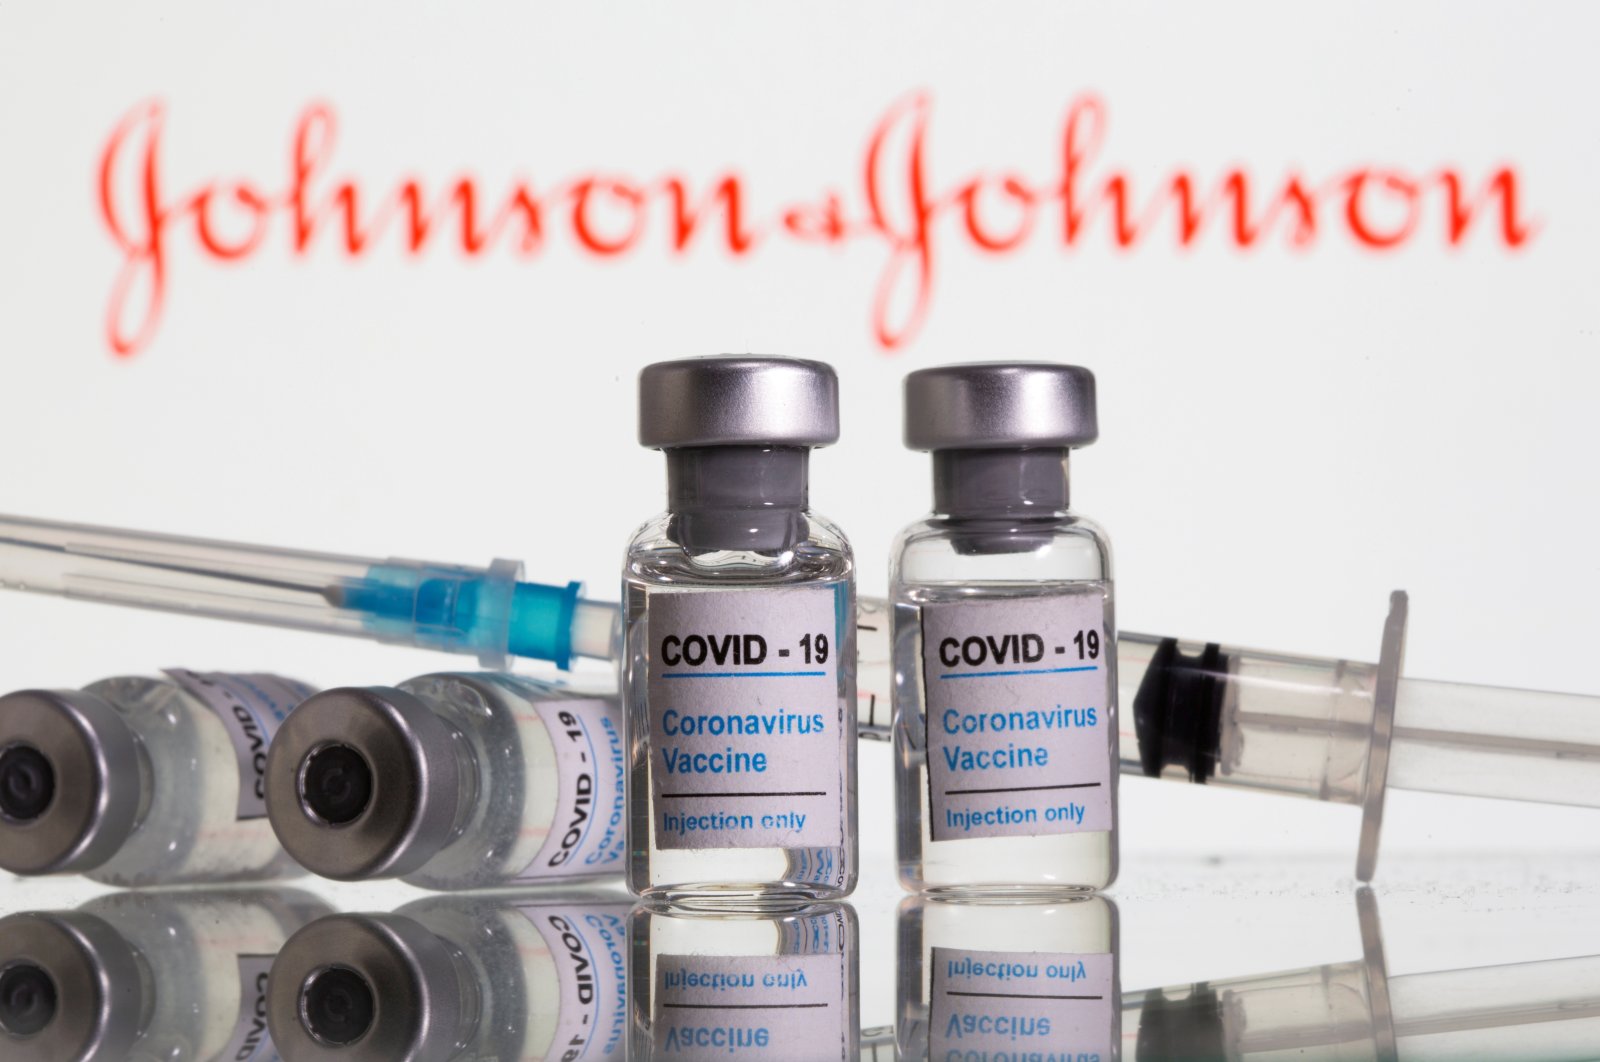 Vials labeled "COVID-19 Coronavirus Vaccine" and a syringe are seen in front of the displayed Johnson&Johnson logo. Feb. 9, 2021. (Reuters Photo)